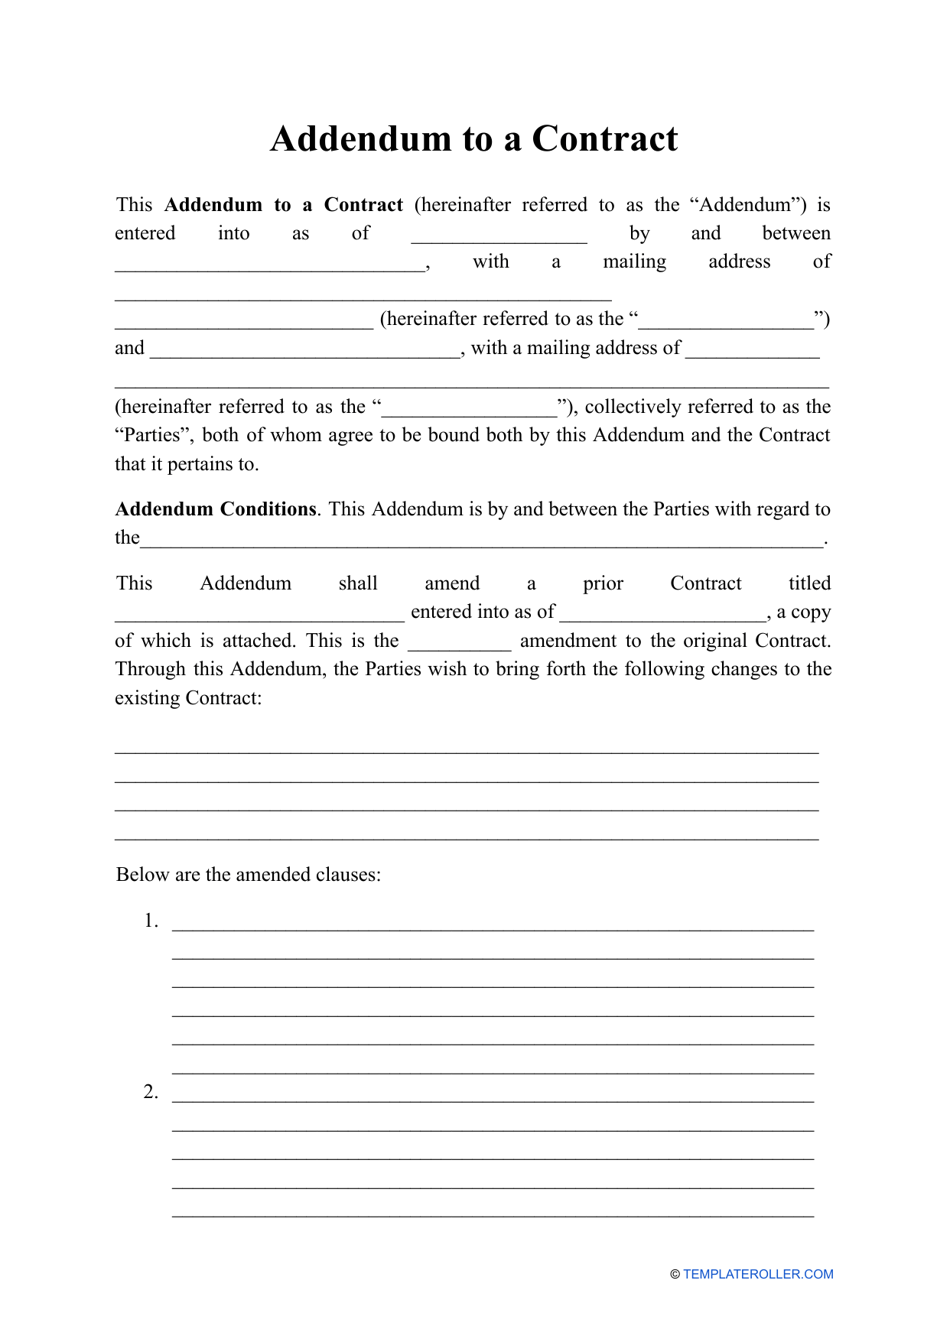 Addendum to a Contract, Page 1